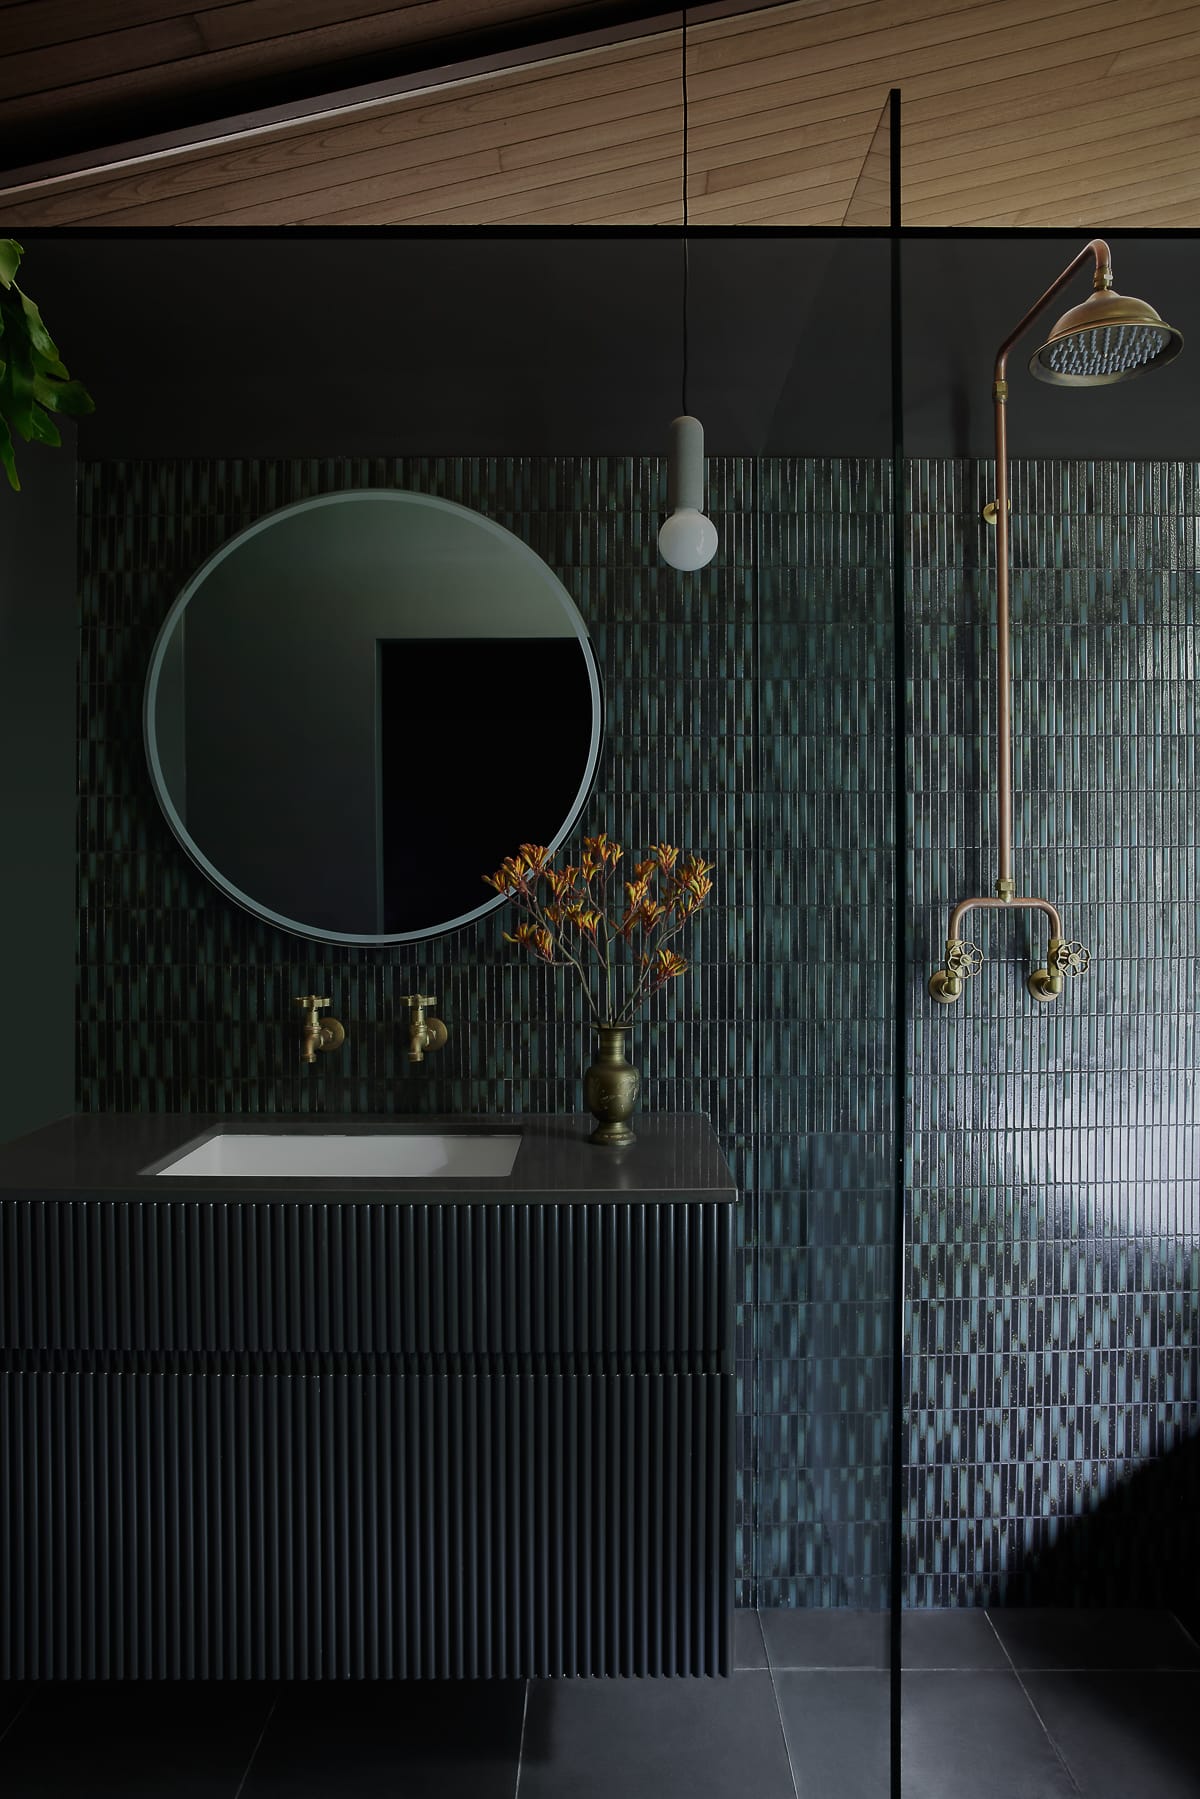 An interior shot of the blue tiled bathroom showing the dark vanity and brass tapware